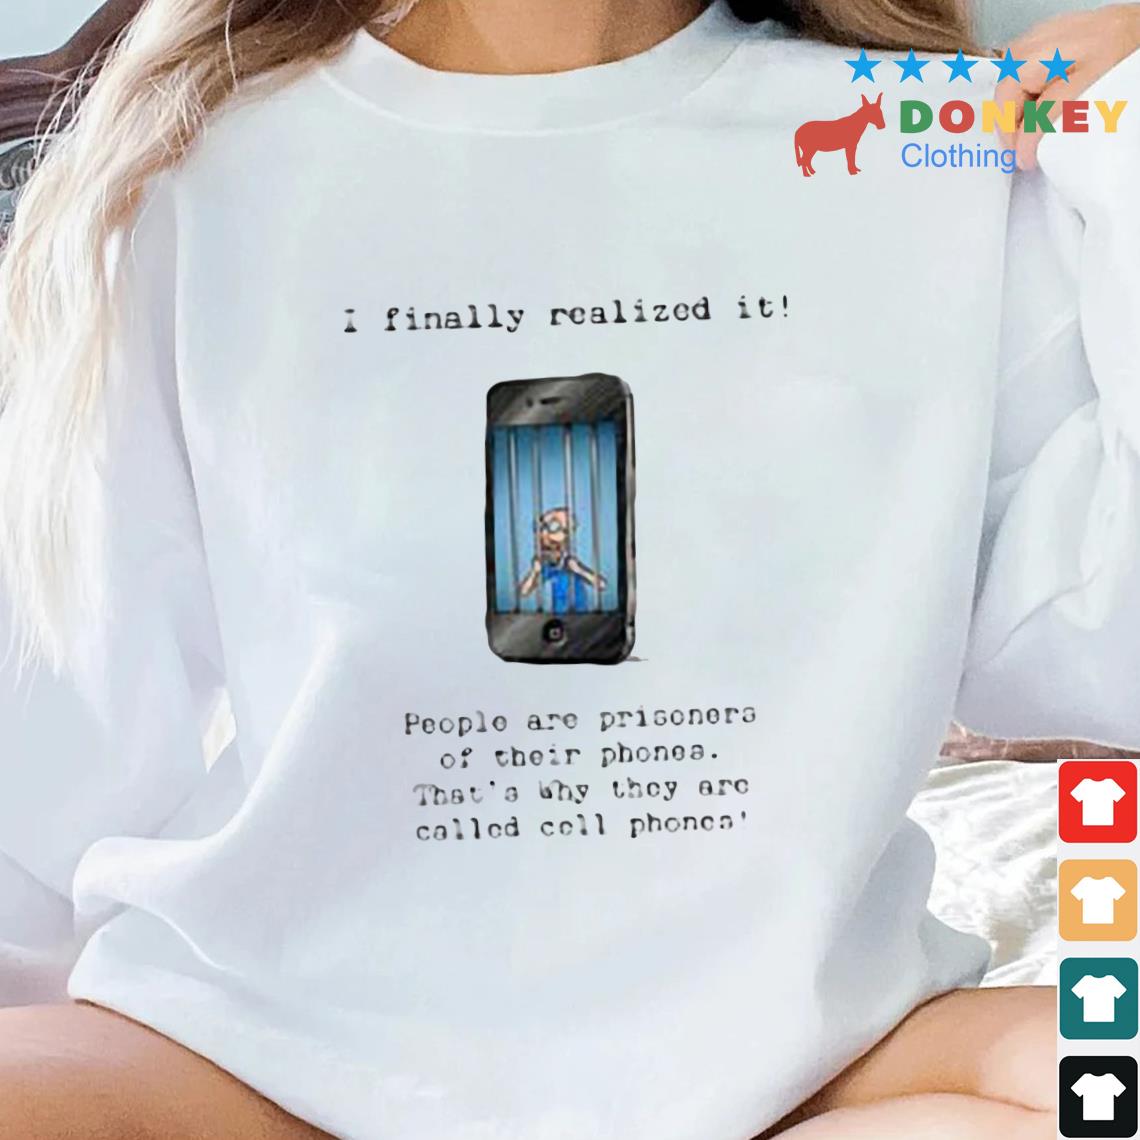 I Finally Realized It People Are Prisoners Of Their Phones That's Why They Are Called Cell Phones Shirt